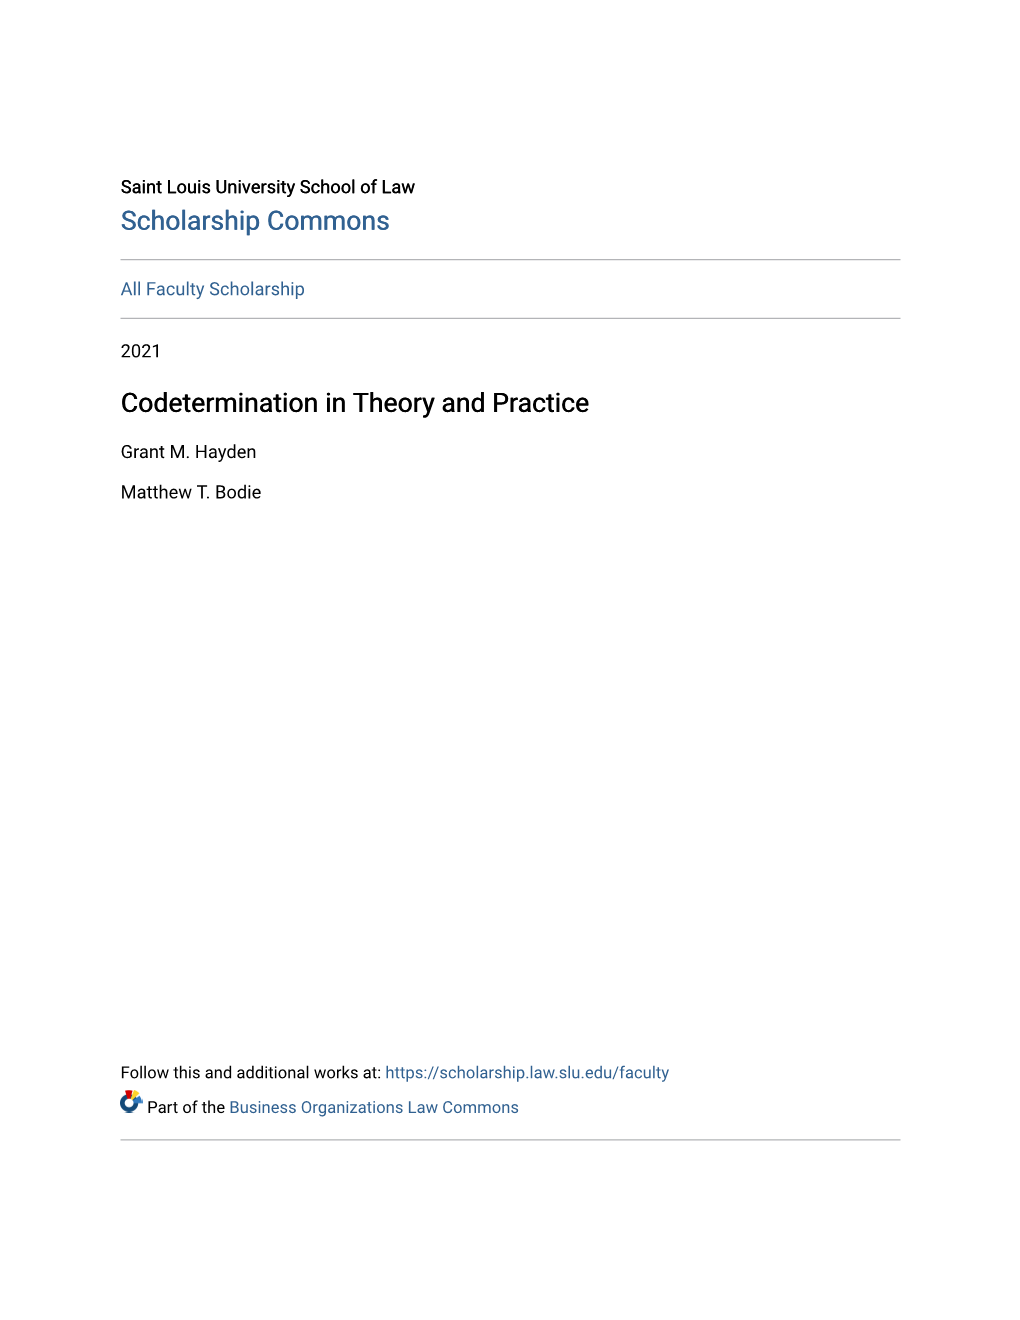 Codetermination in Theory and Practice